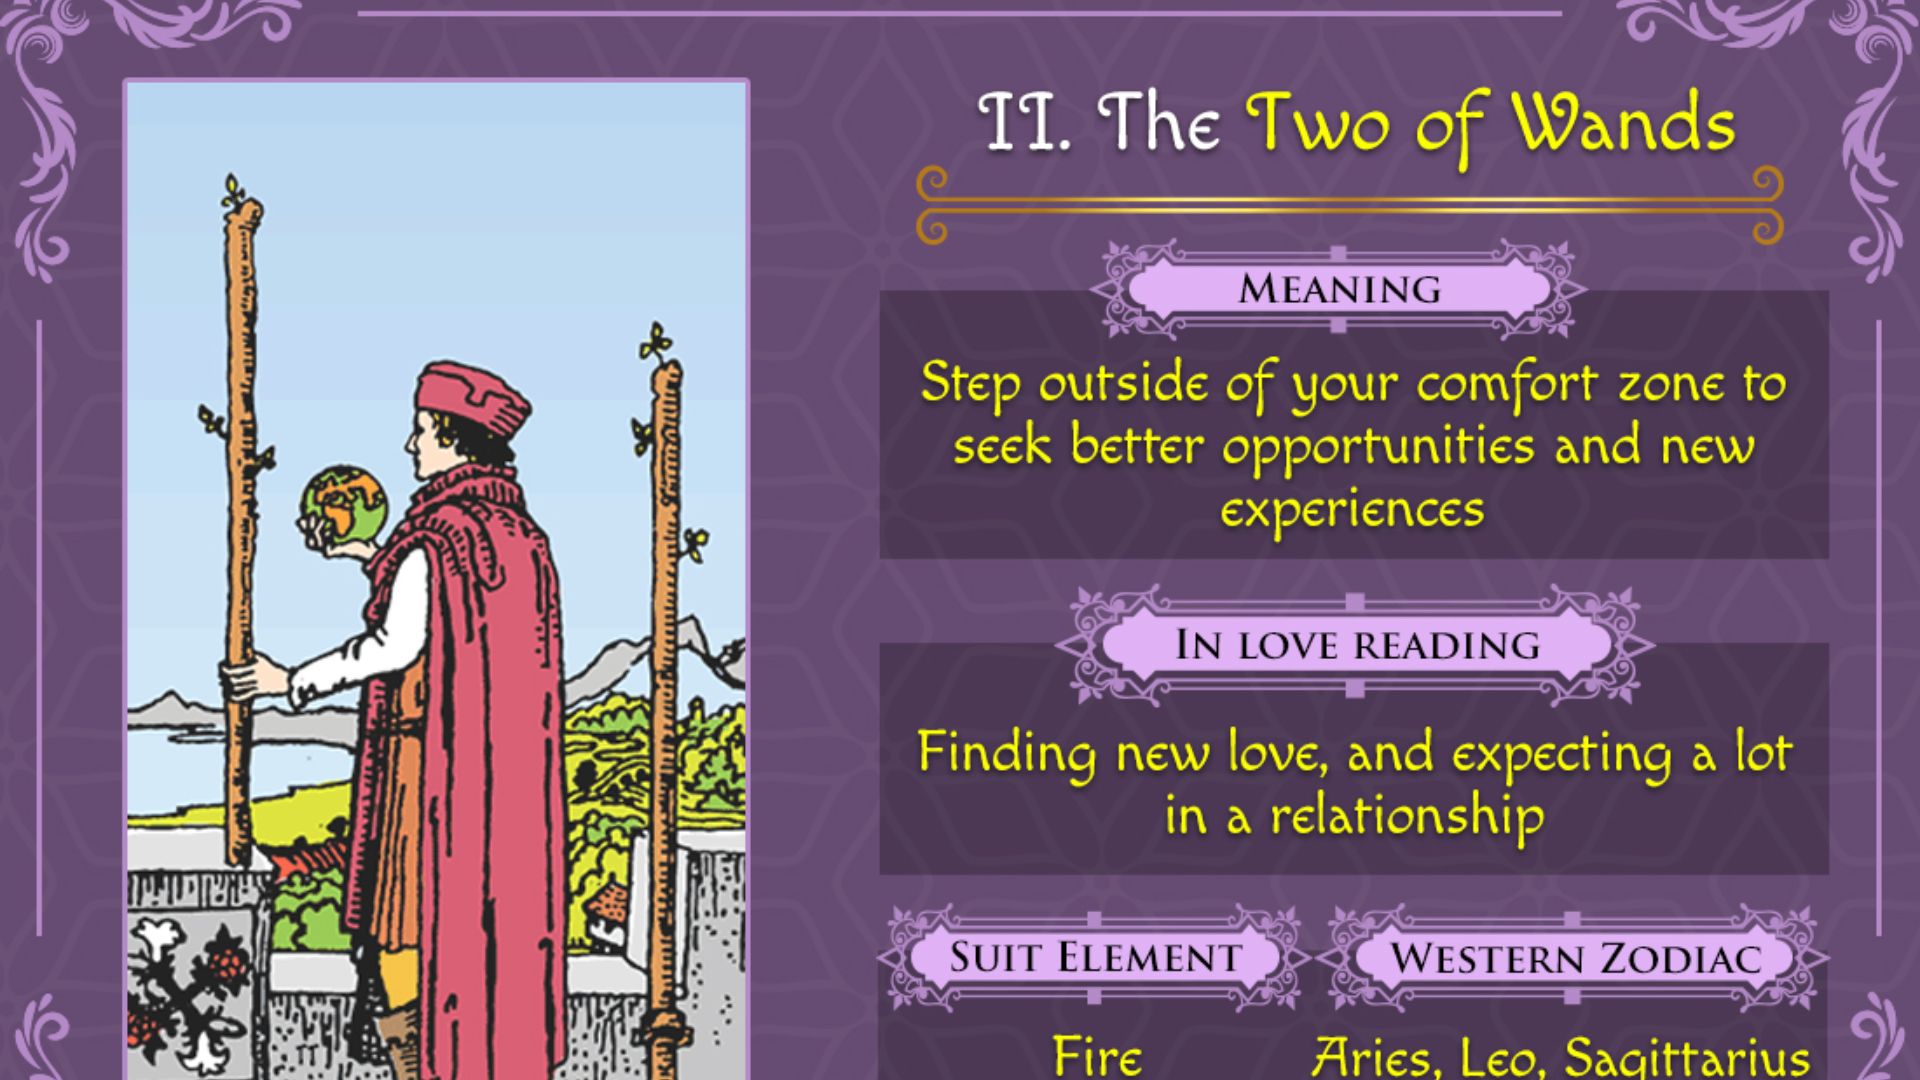 2 of Wands Tarot Card With Its Traits